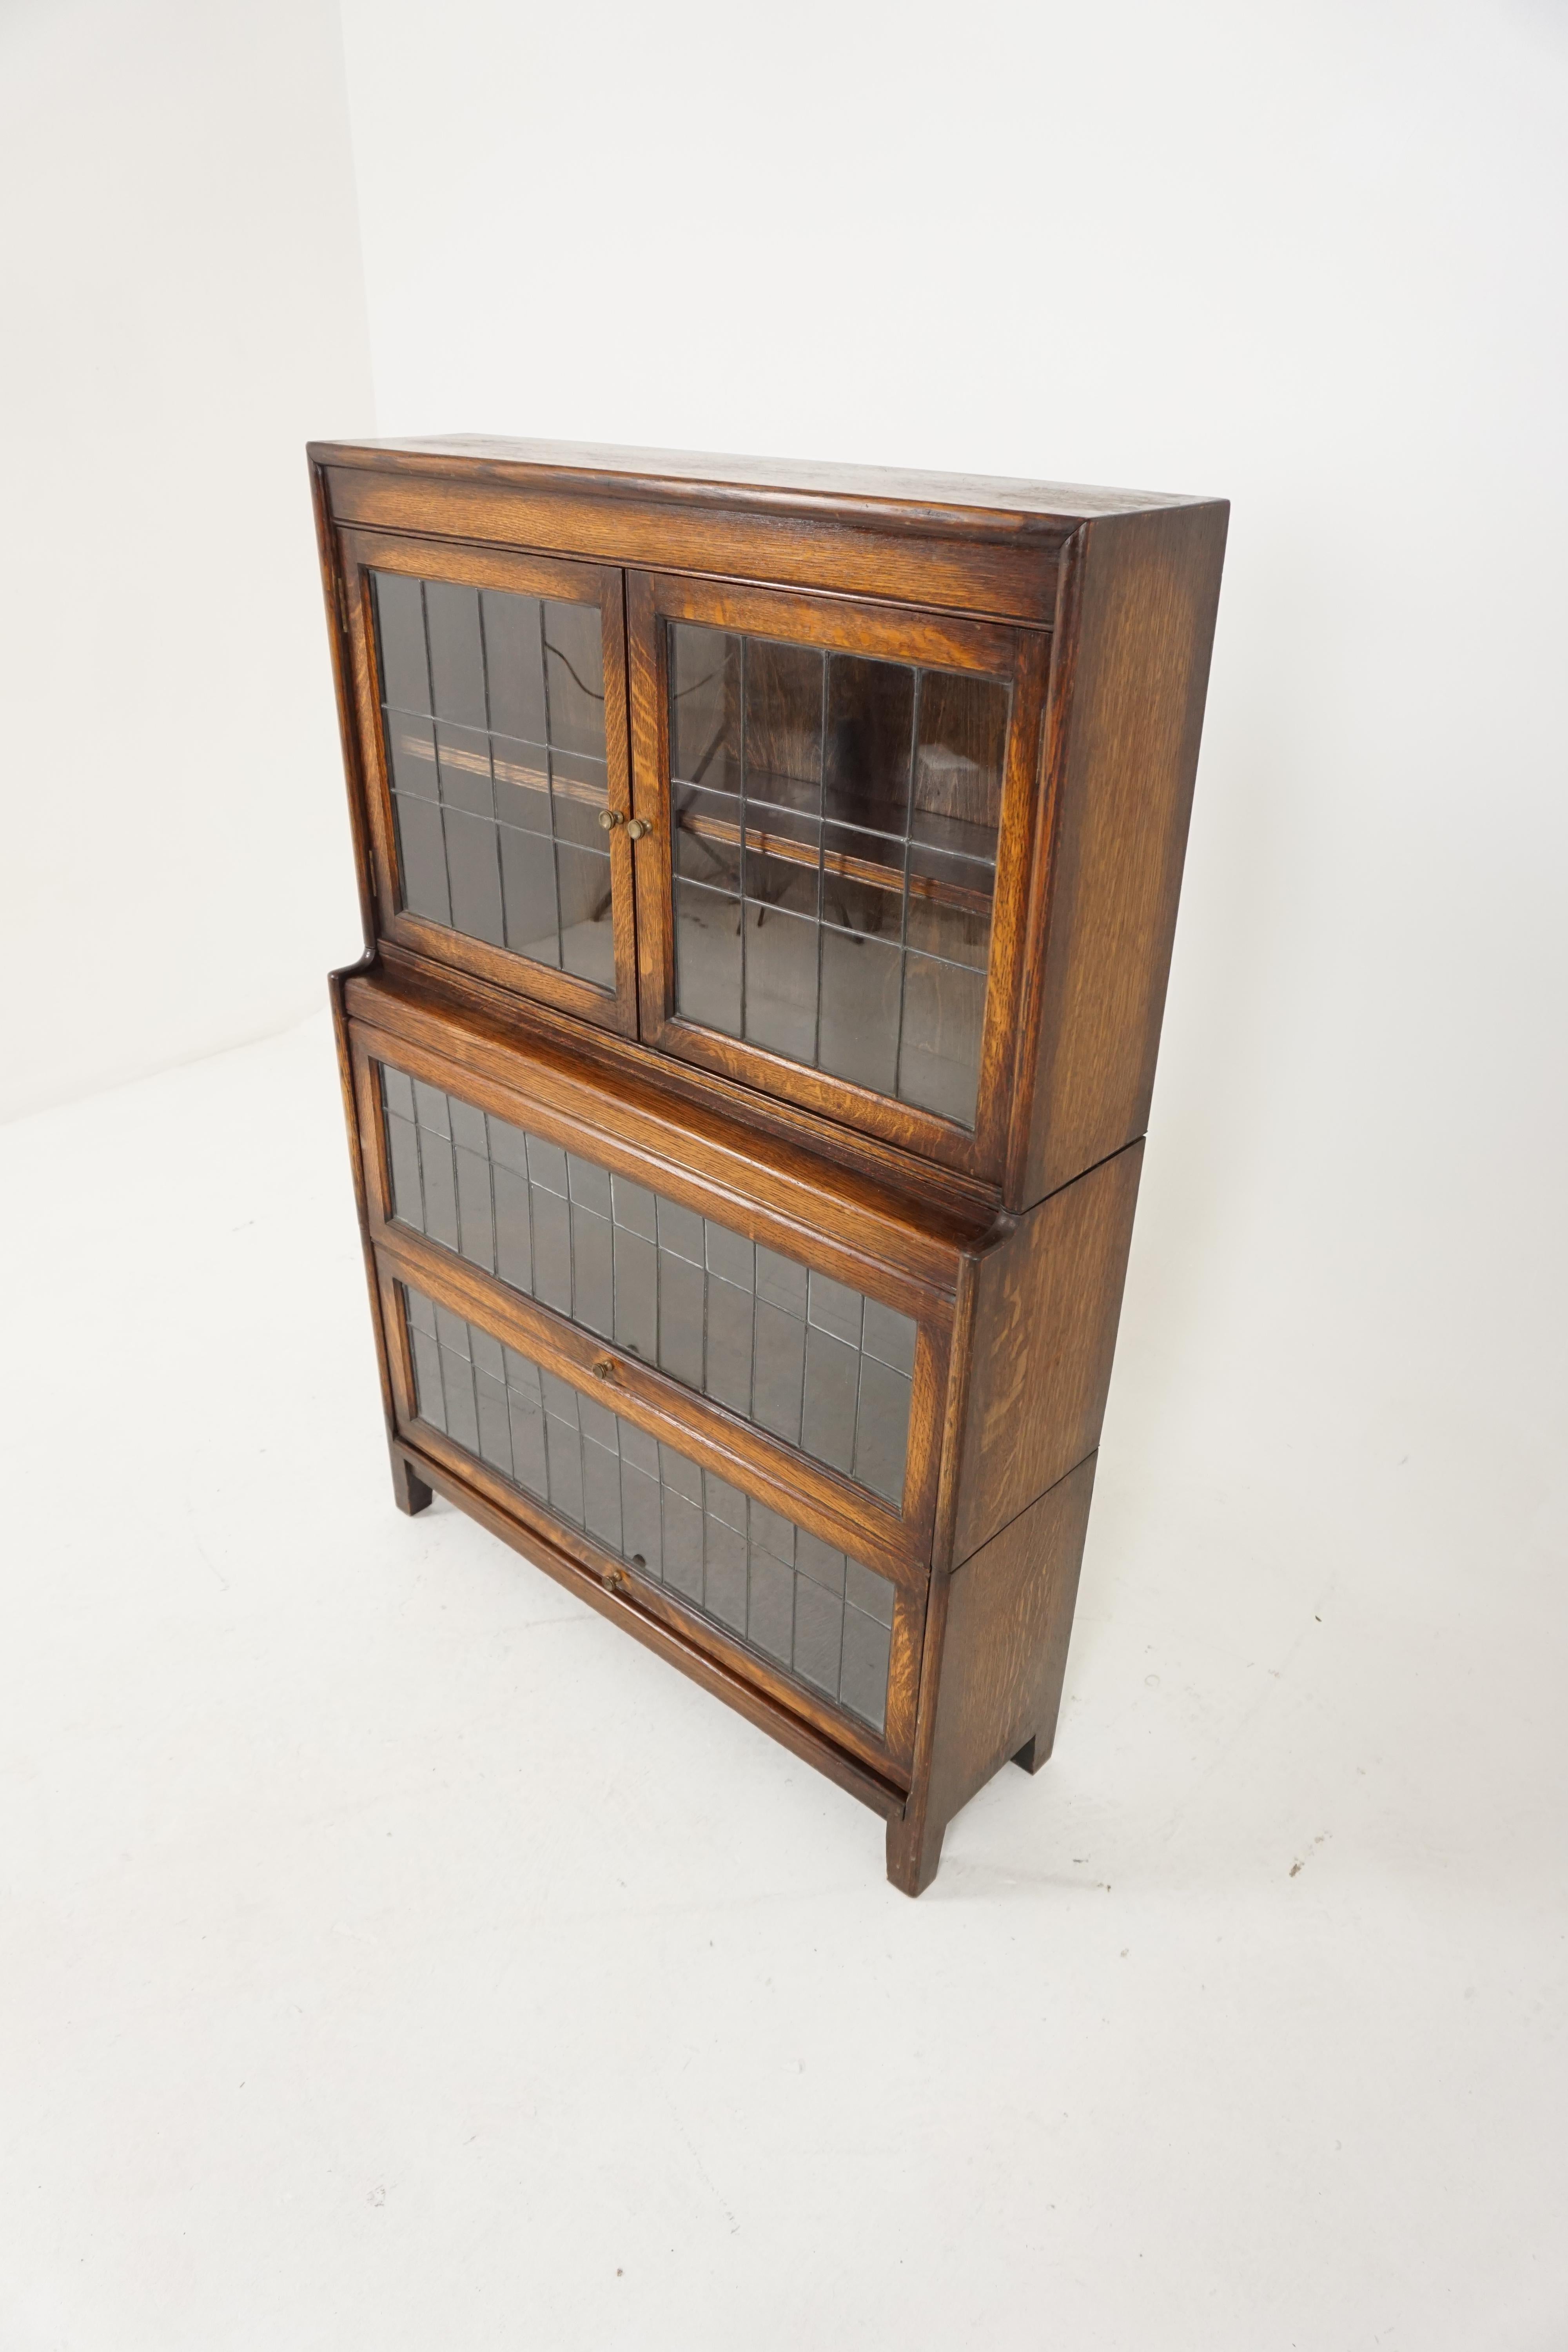 Early 20th Century Antique Oak Bookcase, Leaded Glass Stacking Bookcase, Scotland 1920, B1866